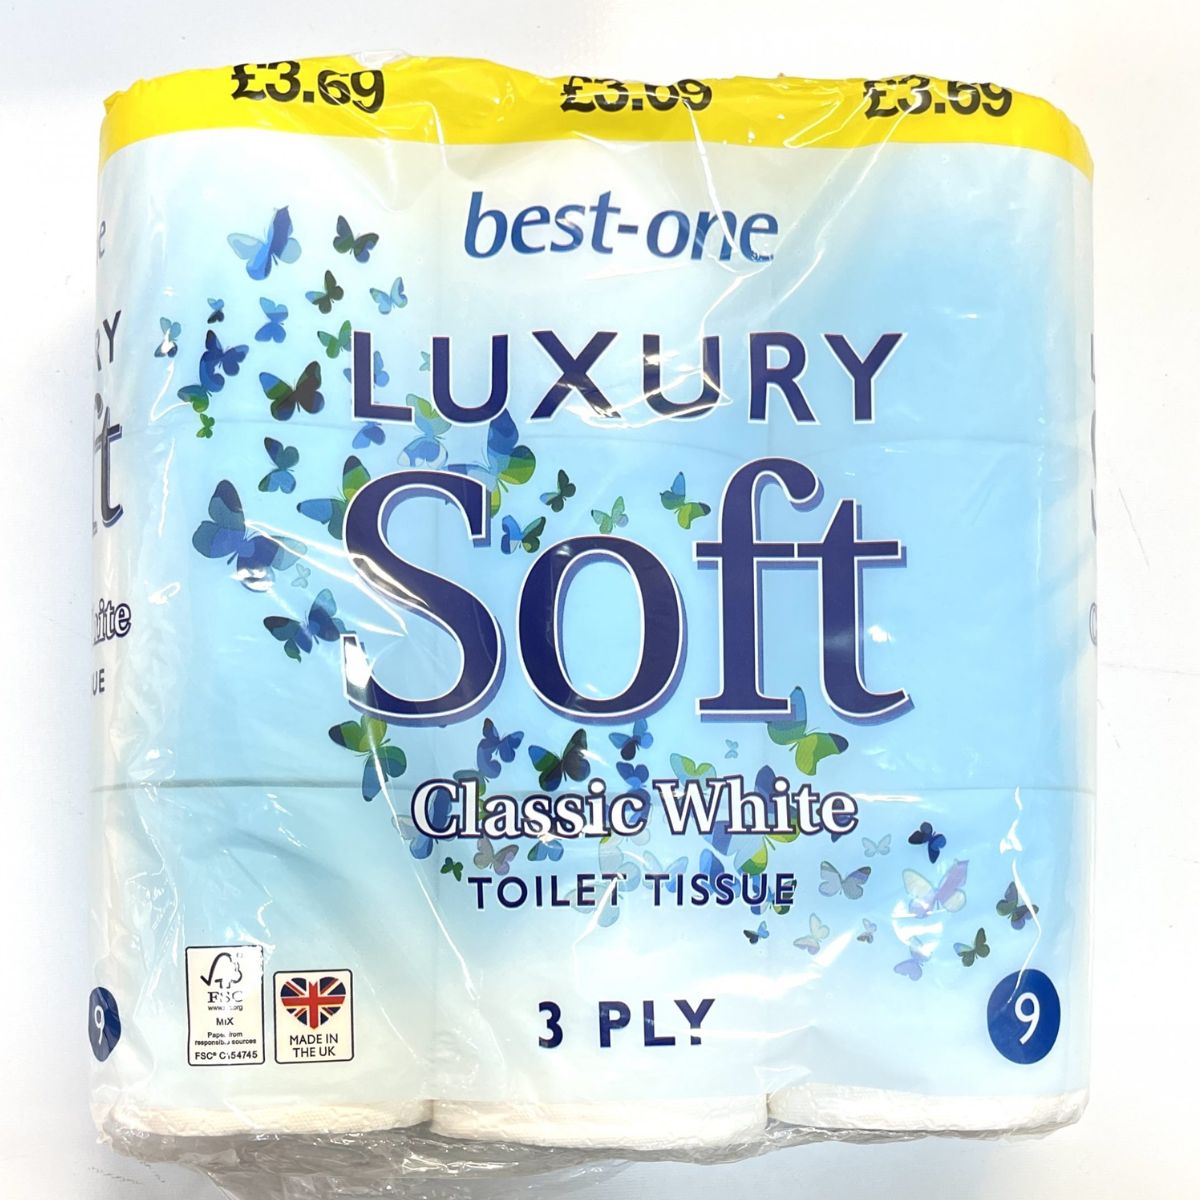 Best One - Luxury Soft Classic White Toilet Tissue 3 Ply - 9 Rolls is the best one luxury soft classic white toilet paper.